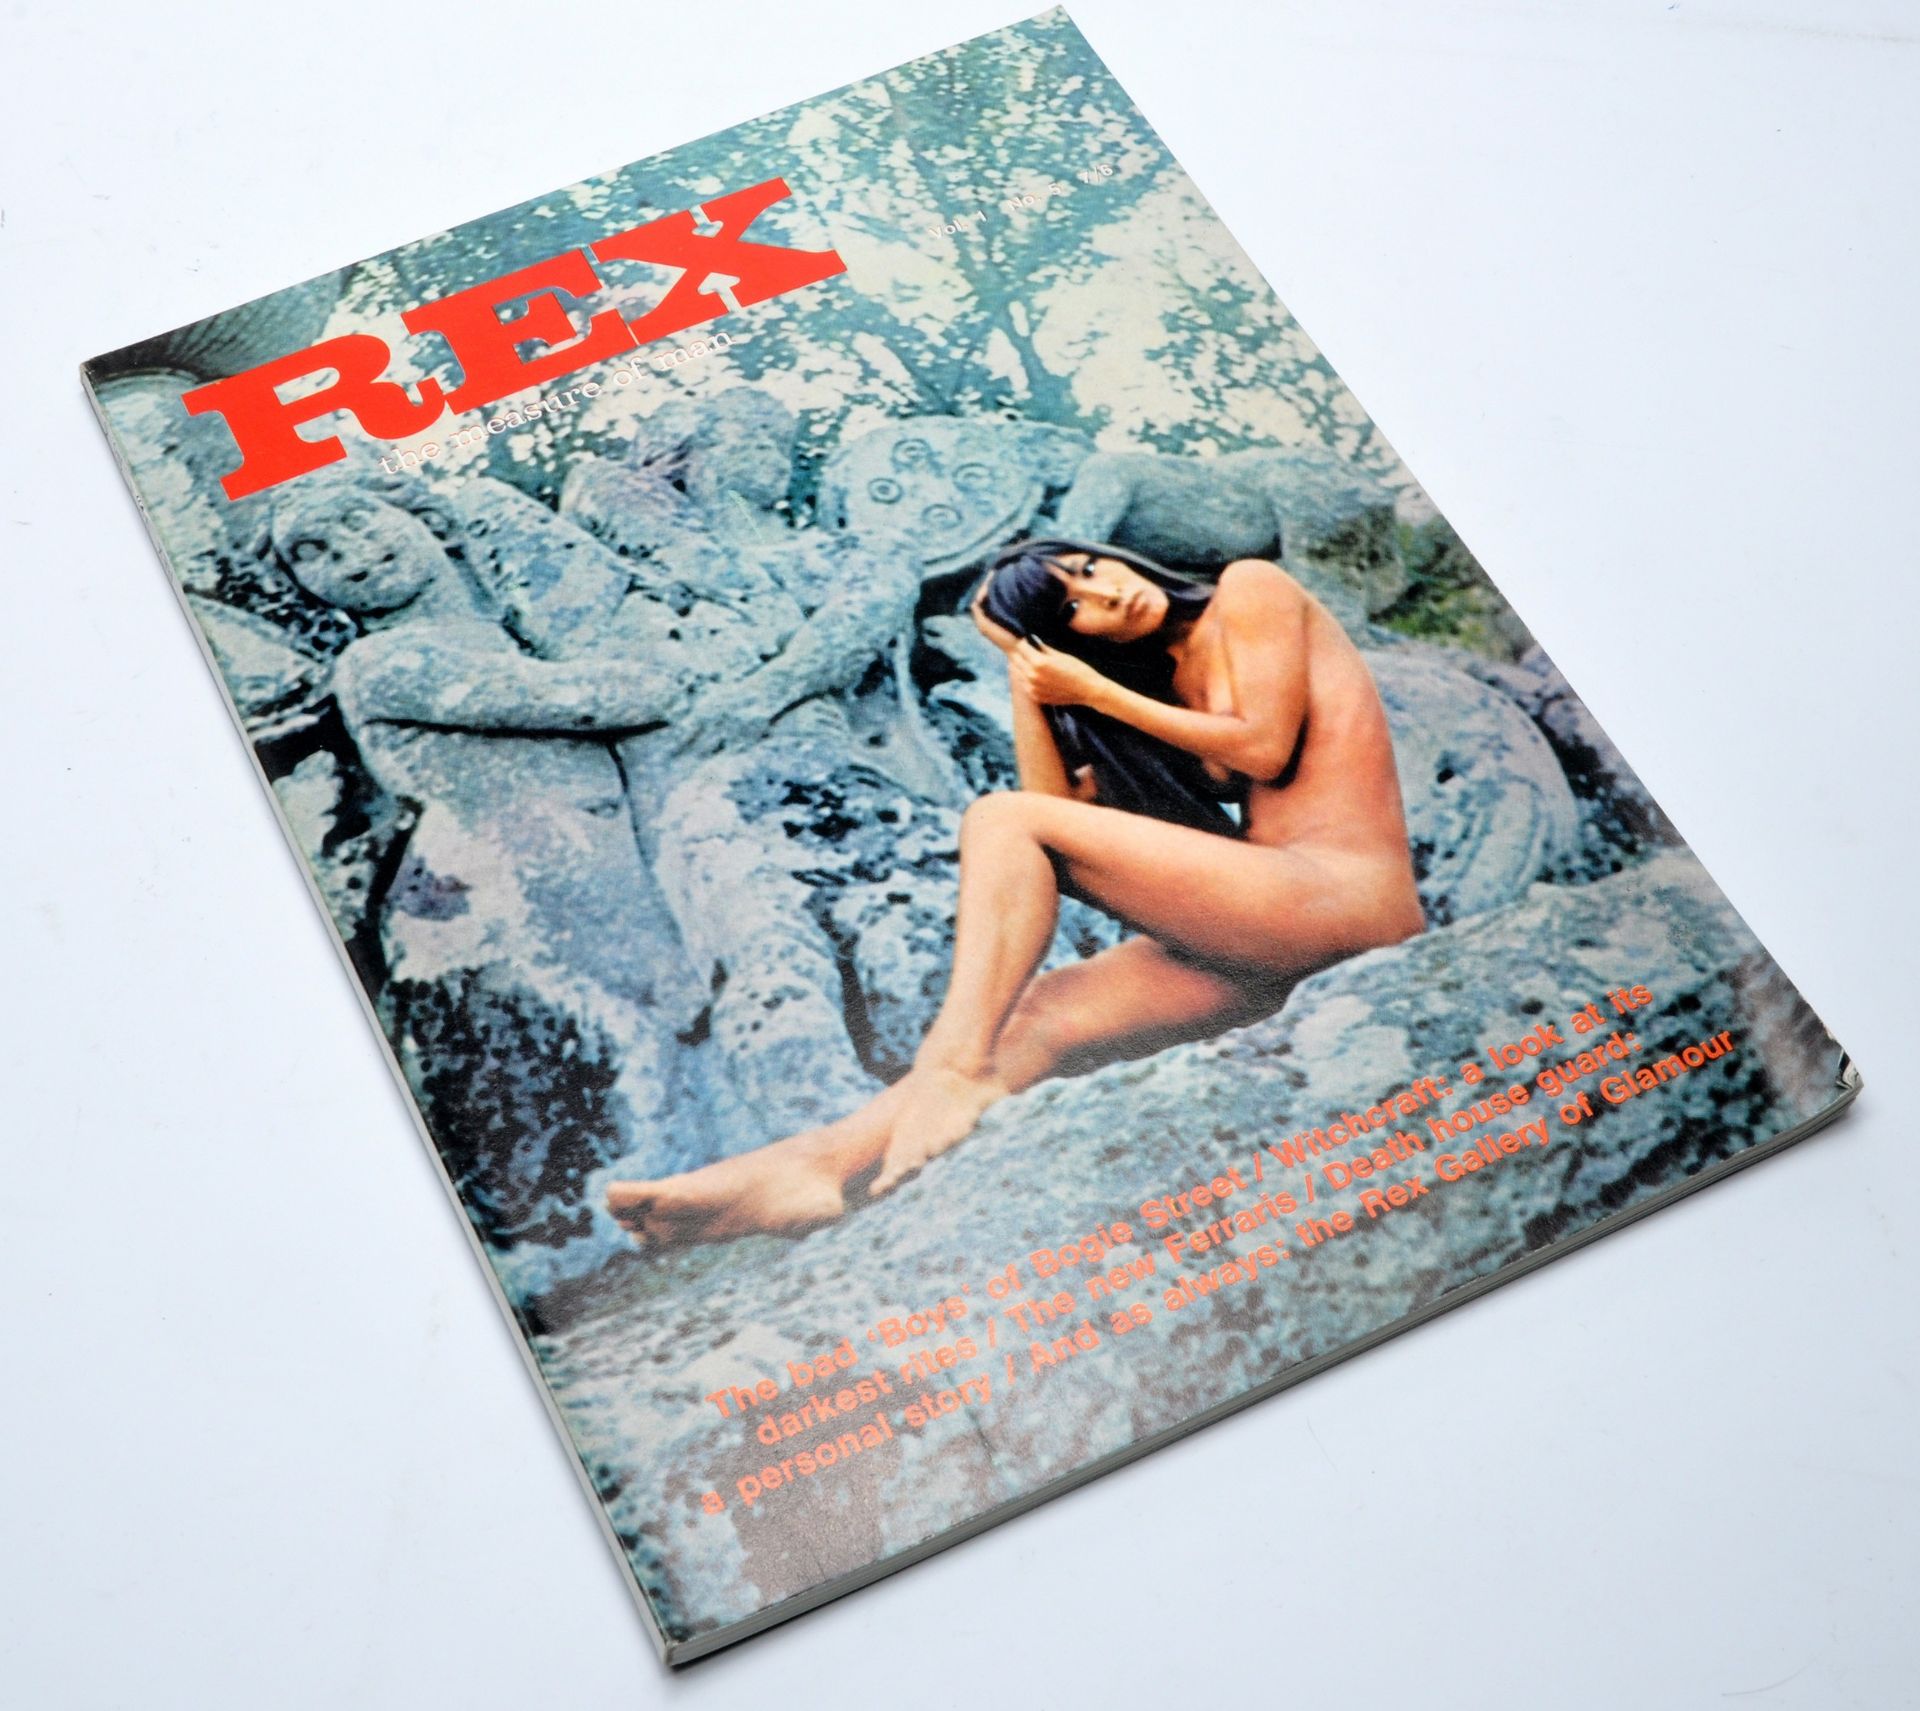 Adult Glamour Magazine / Vintage Erotica, comprising single issue of Rex. Please note unblurred